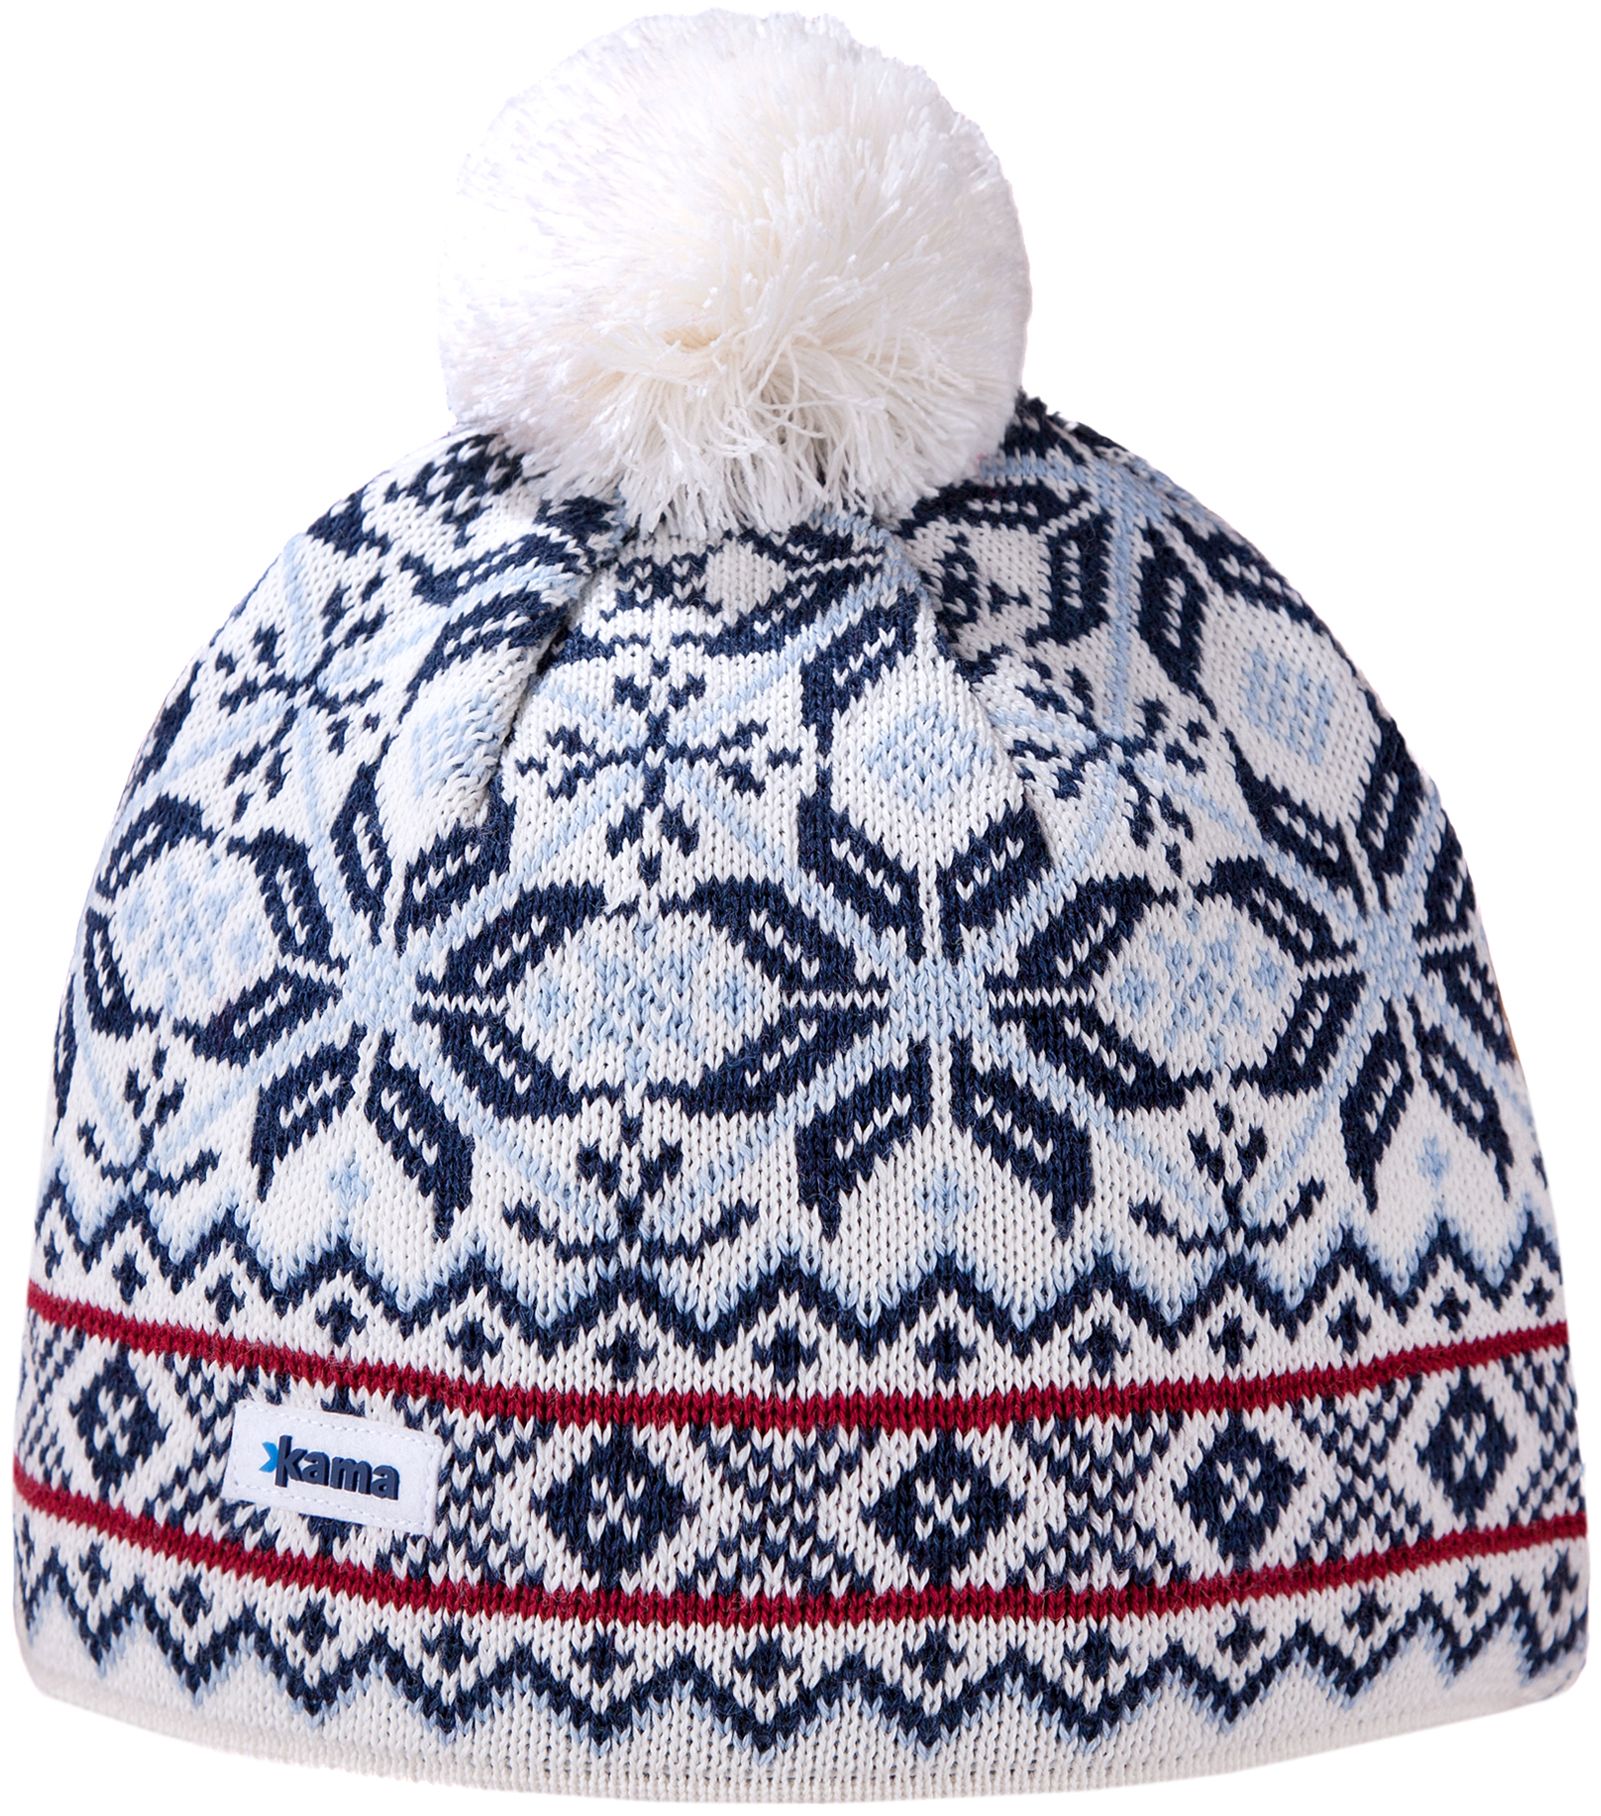 KNITTED HAT AW06 - Winter Hat